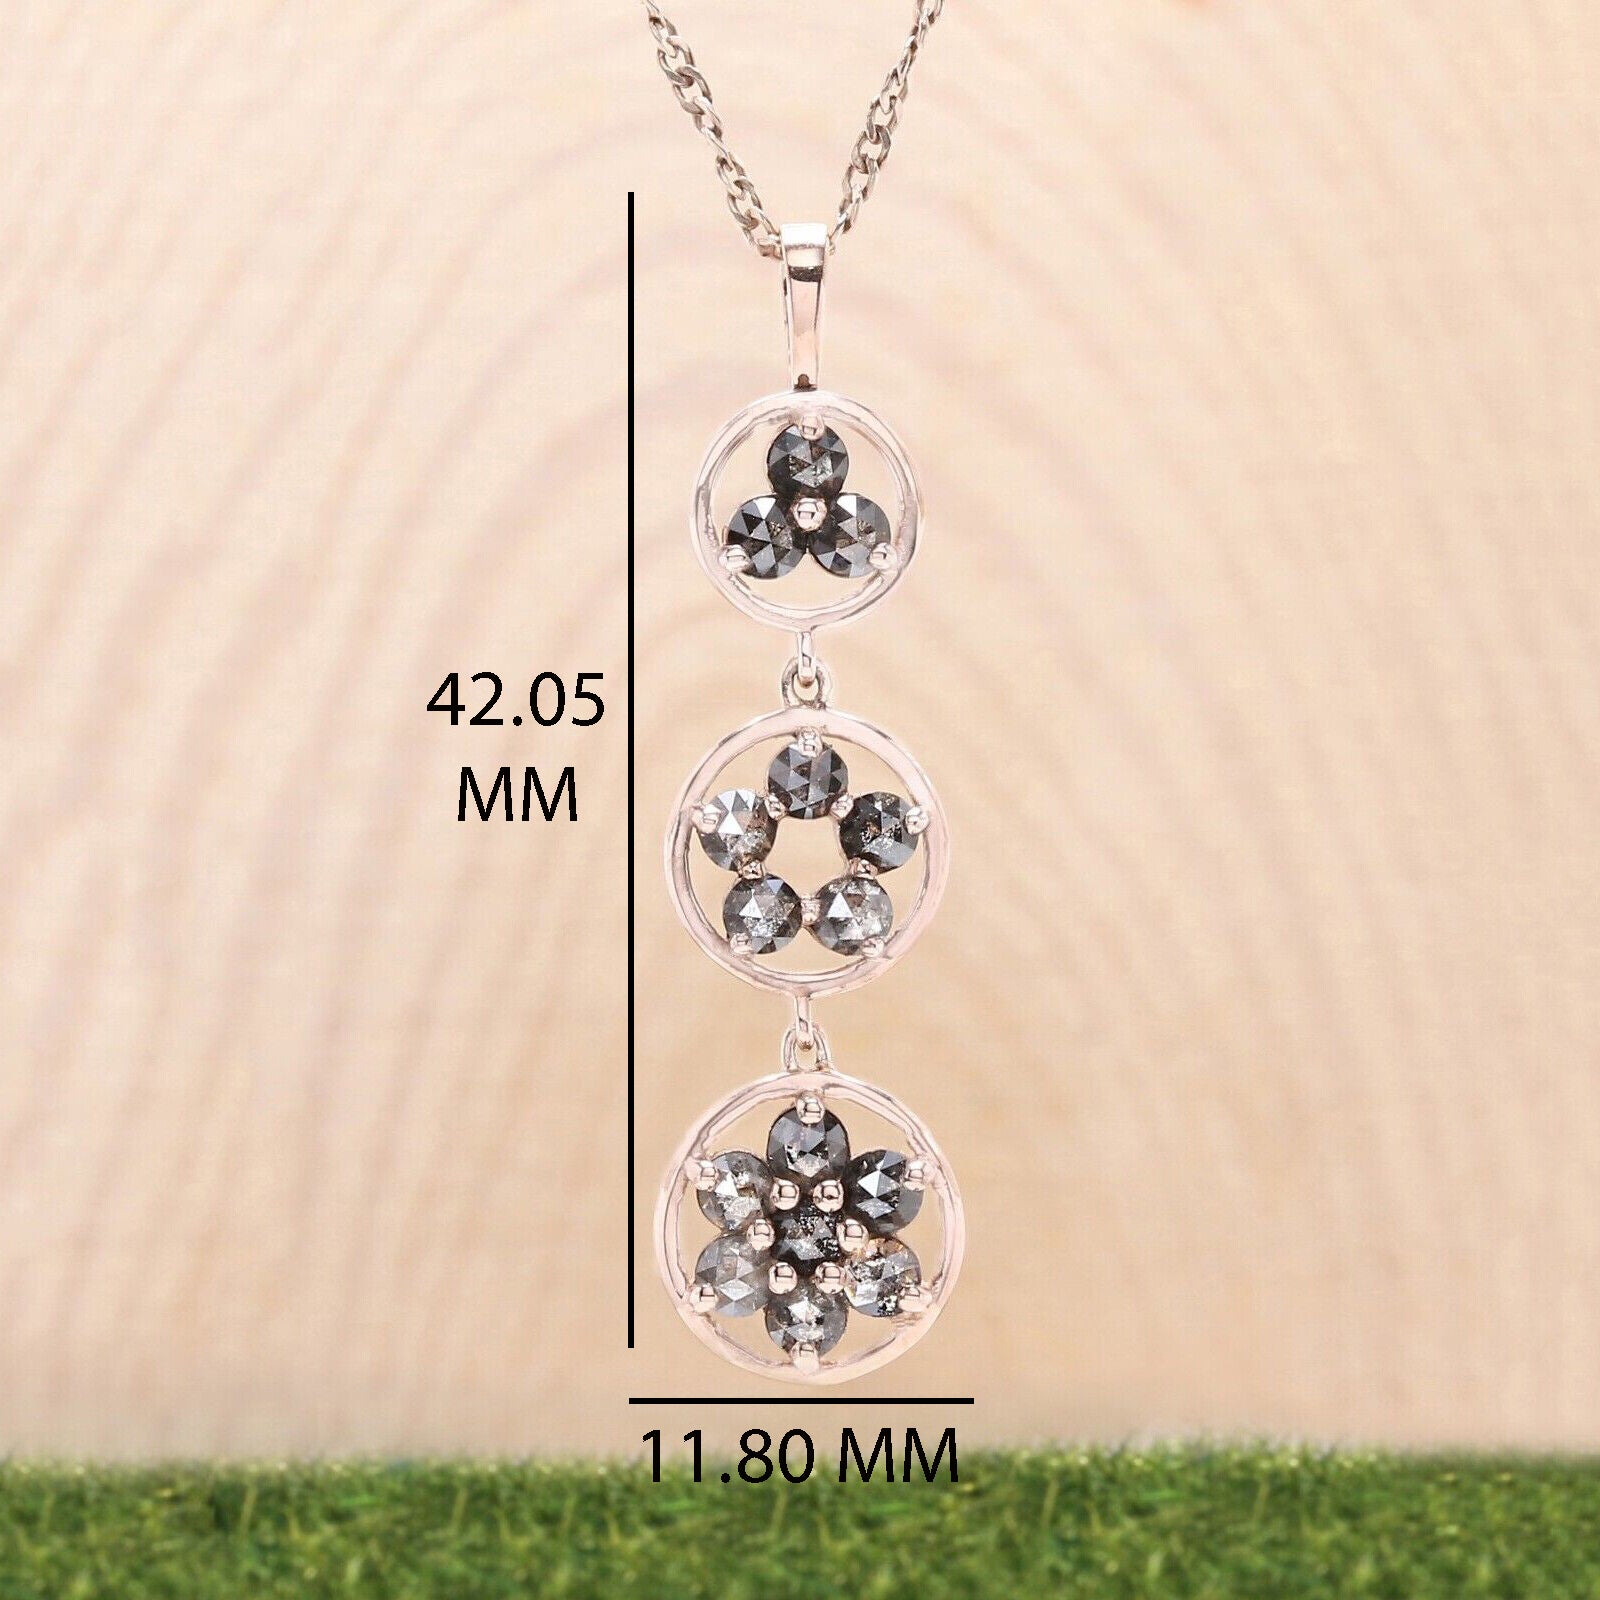 Round Rose Cut Salt And Pepper Diamond Pendant, Unique Diamond Pendant, Rose Cut Diamond Pendant, No Chain Including Only Pendant KDL1822